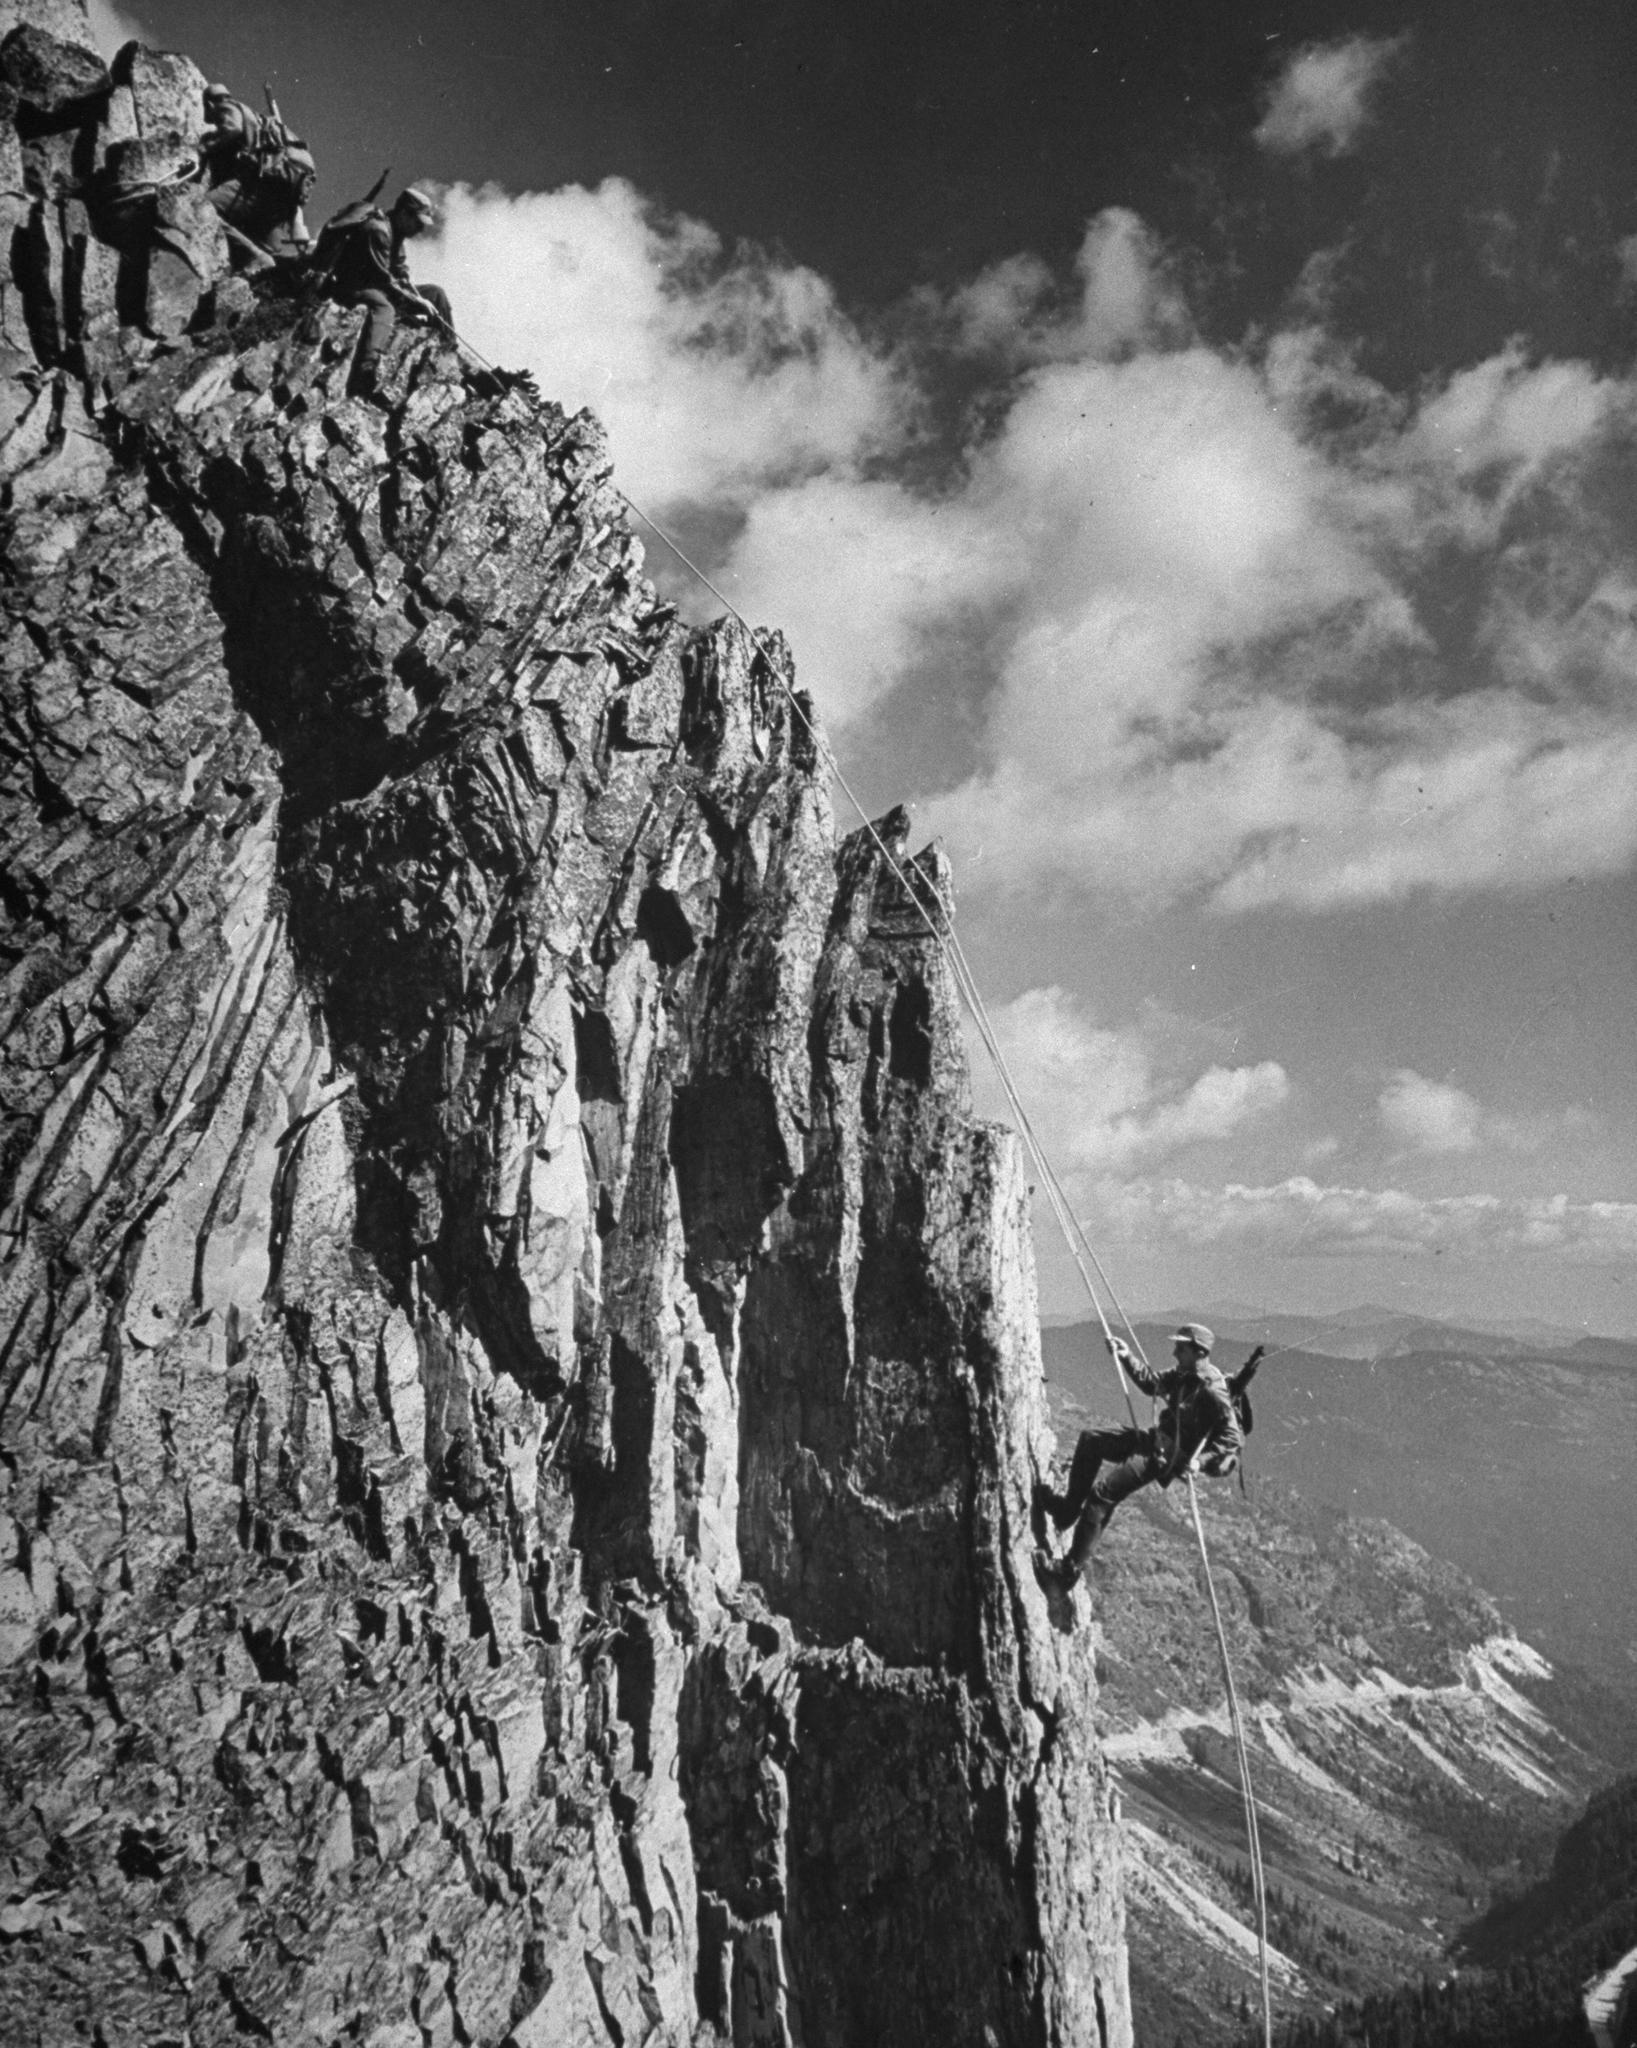 Mountaineering students in training, 1942.